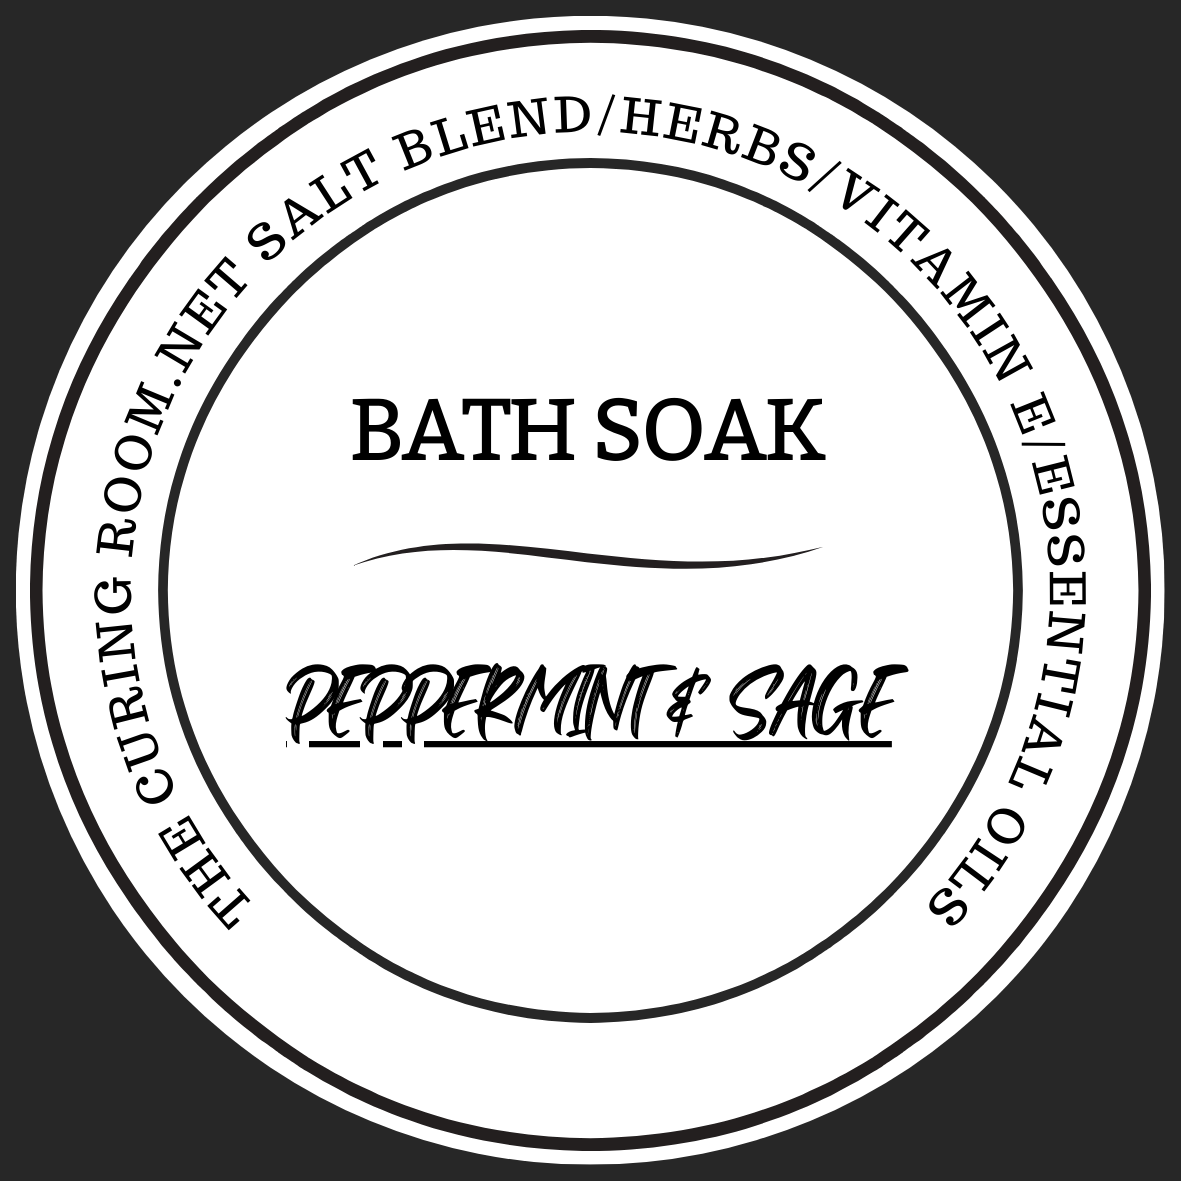 Peppermint and Sage Bath